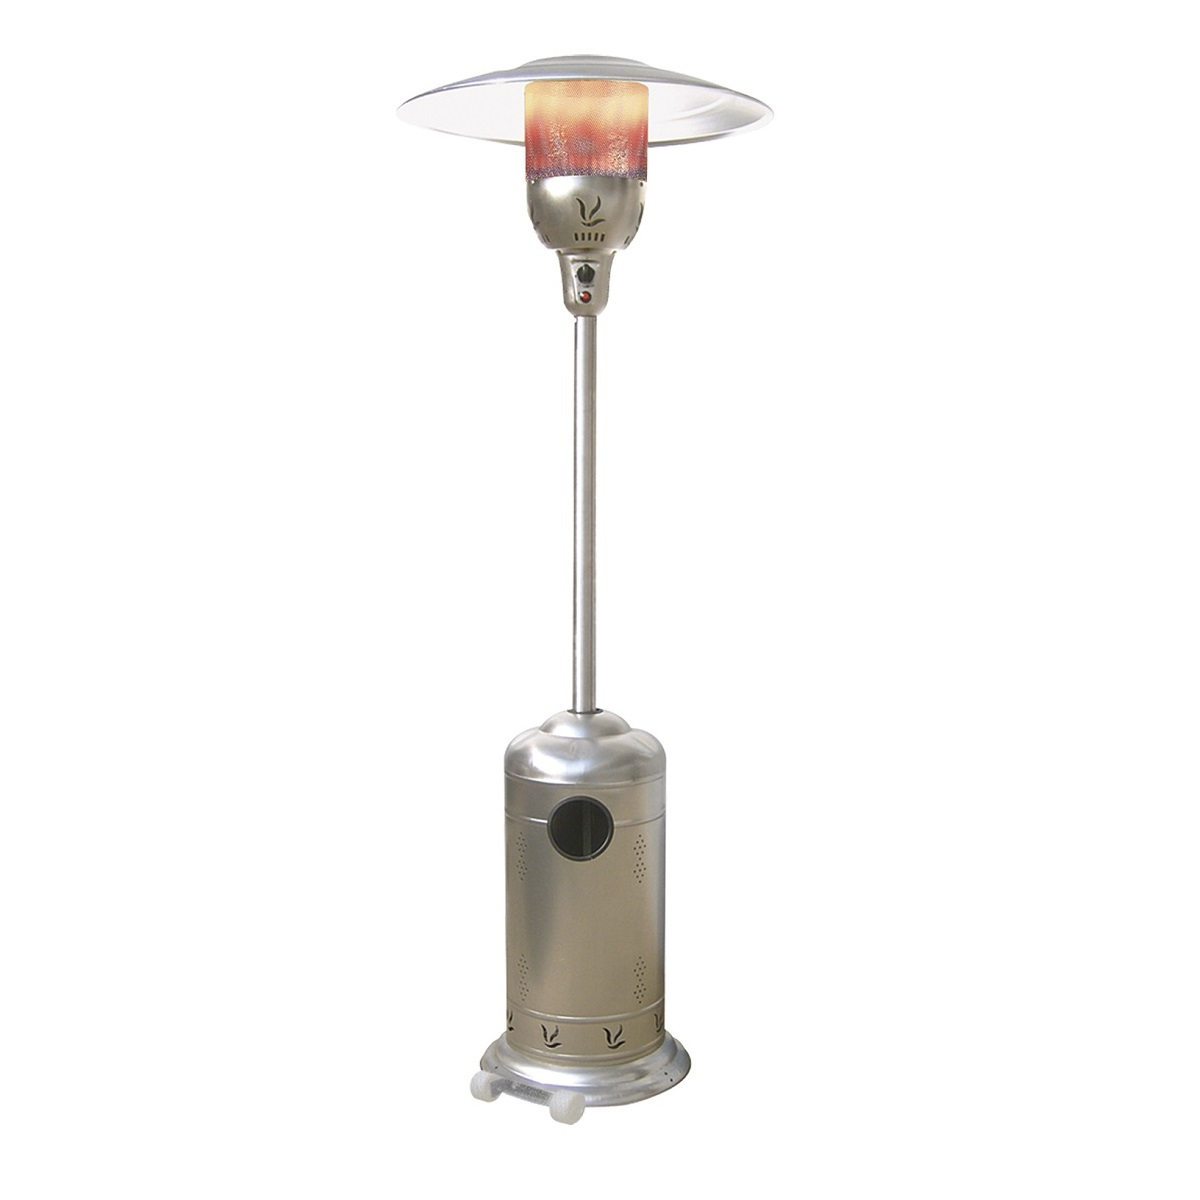 Colorato Colorato Gas Patio Heater Clph 12ps Painted Rolls pertaining to measurements 1200 X 1200